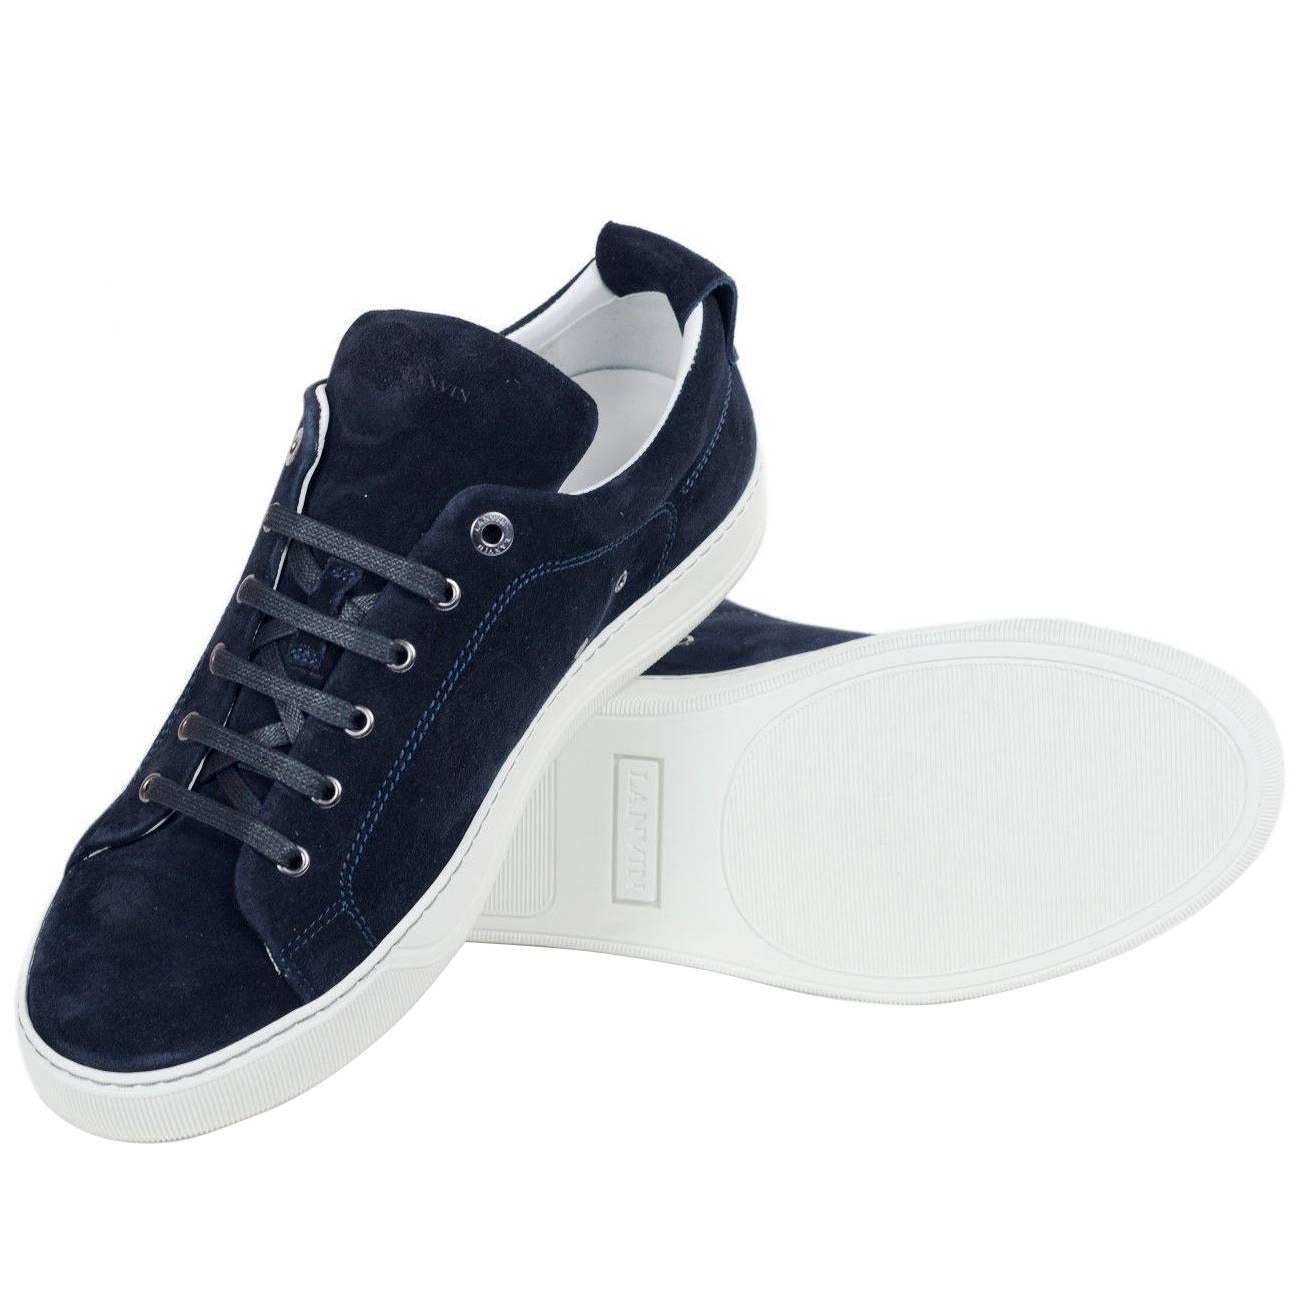 Mens Lanvin Navy Suede Nubuck Calfskin Lace Up Low Top Sneakers For Sale